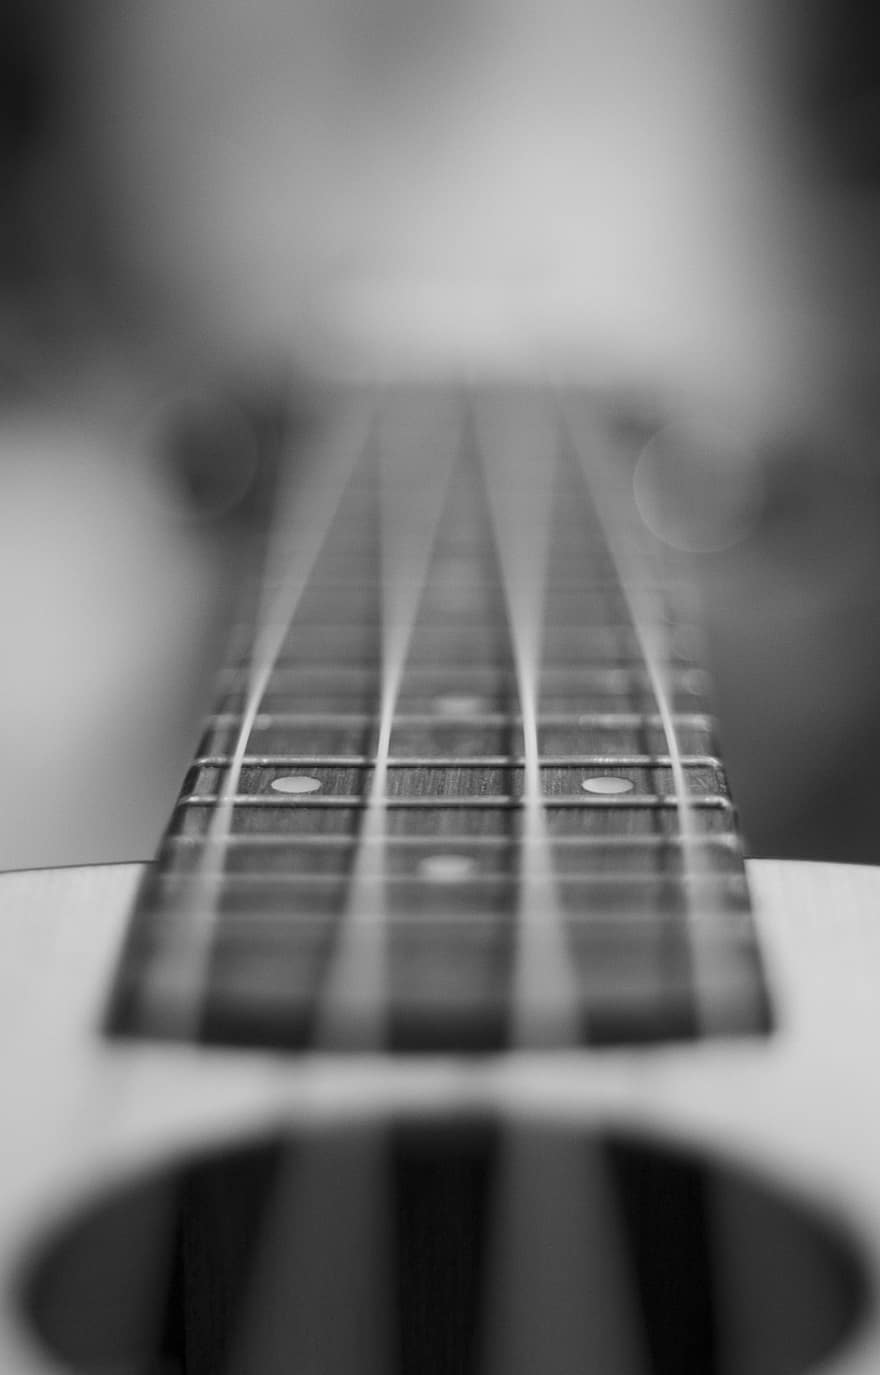 Guitar, Music, Instrument, Black And White, Strings, musical instrument, close-up, fretboard, acoustic guitar, string, string instrument